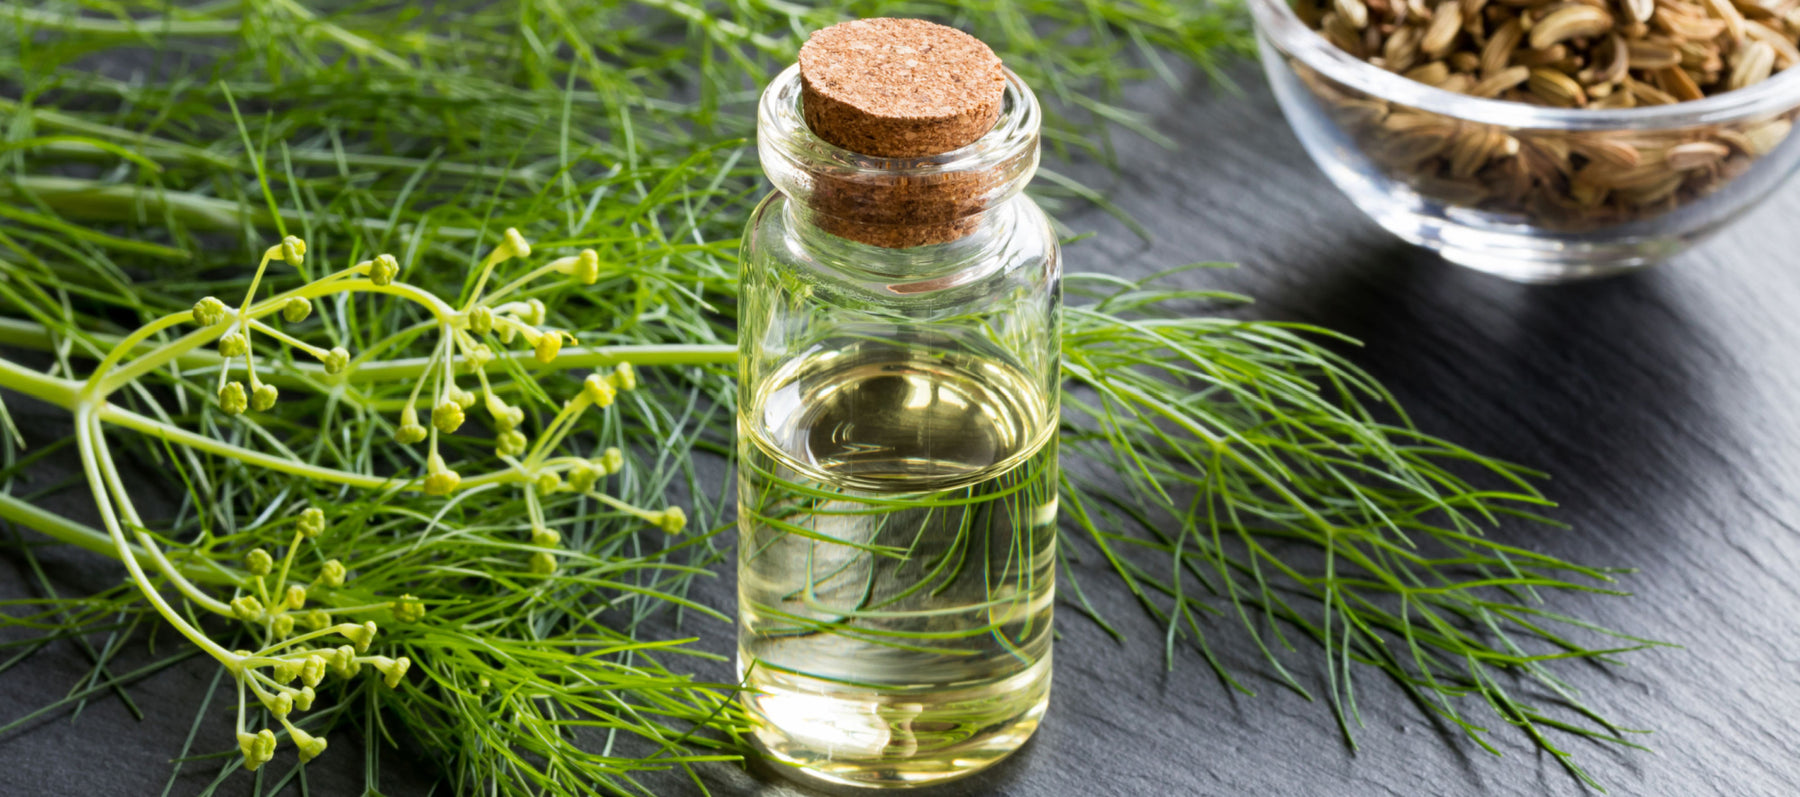 essential oil bottle with fennel and fennel seeds